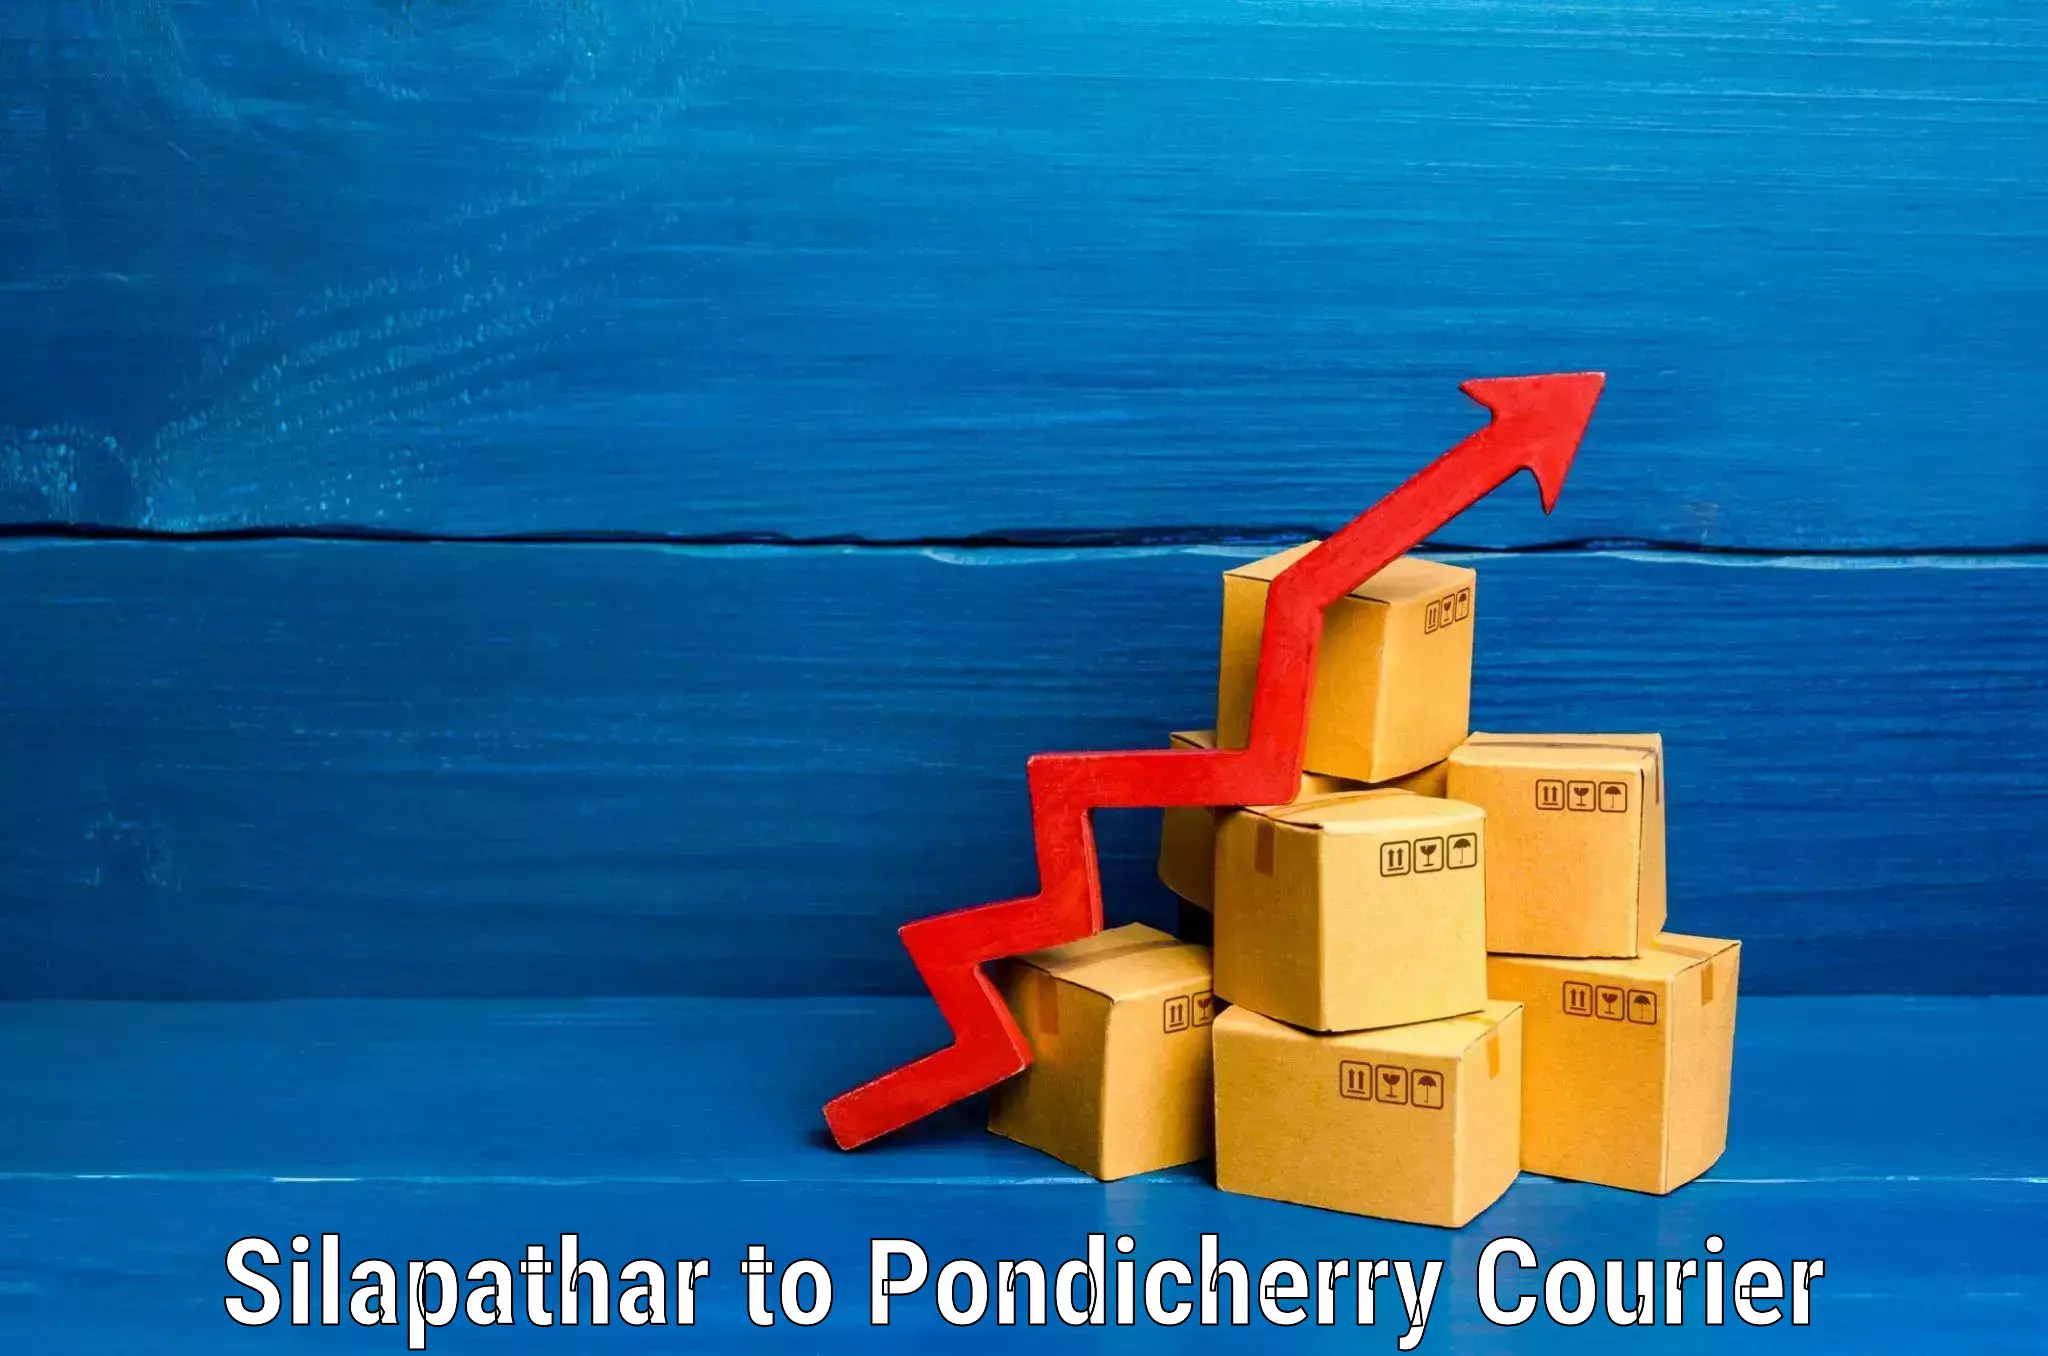 Instant baggage transport quote Silapathar to Pondicherry